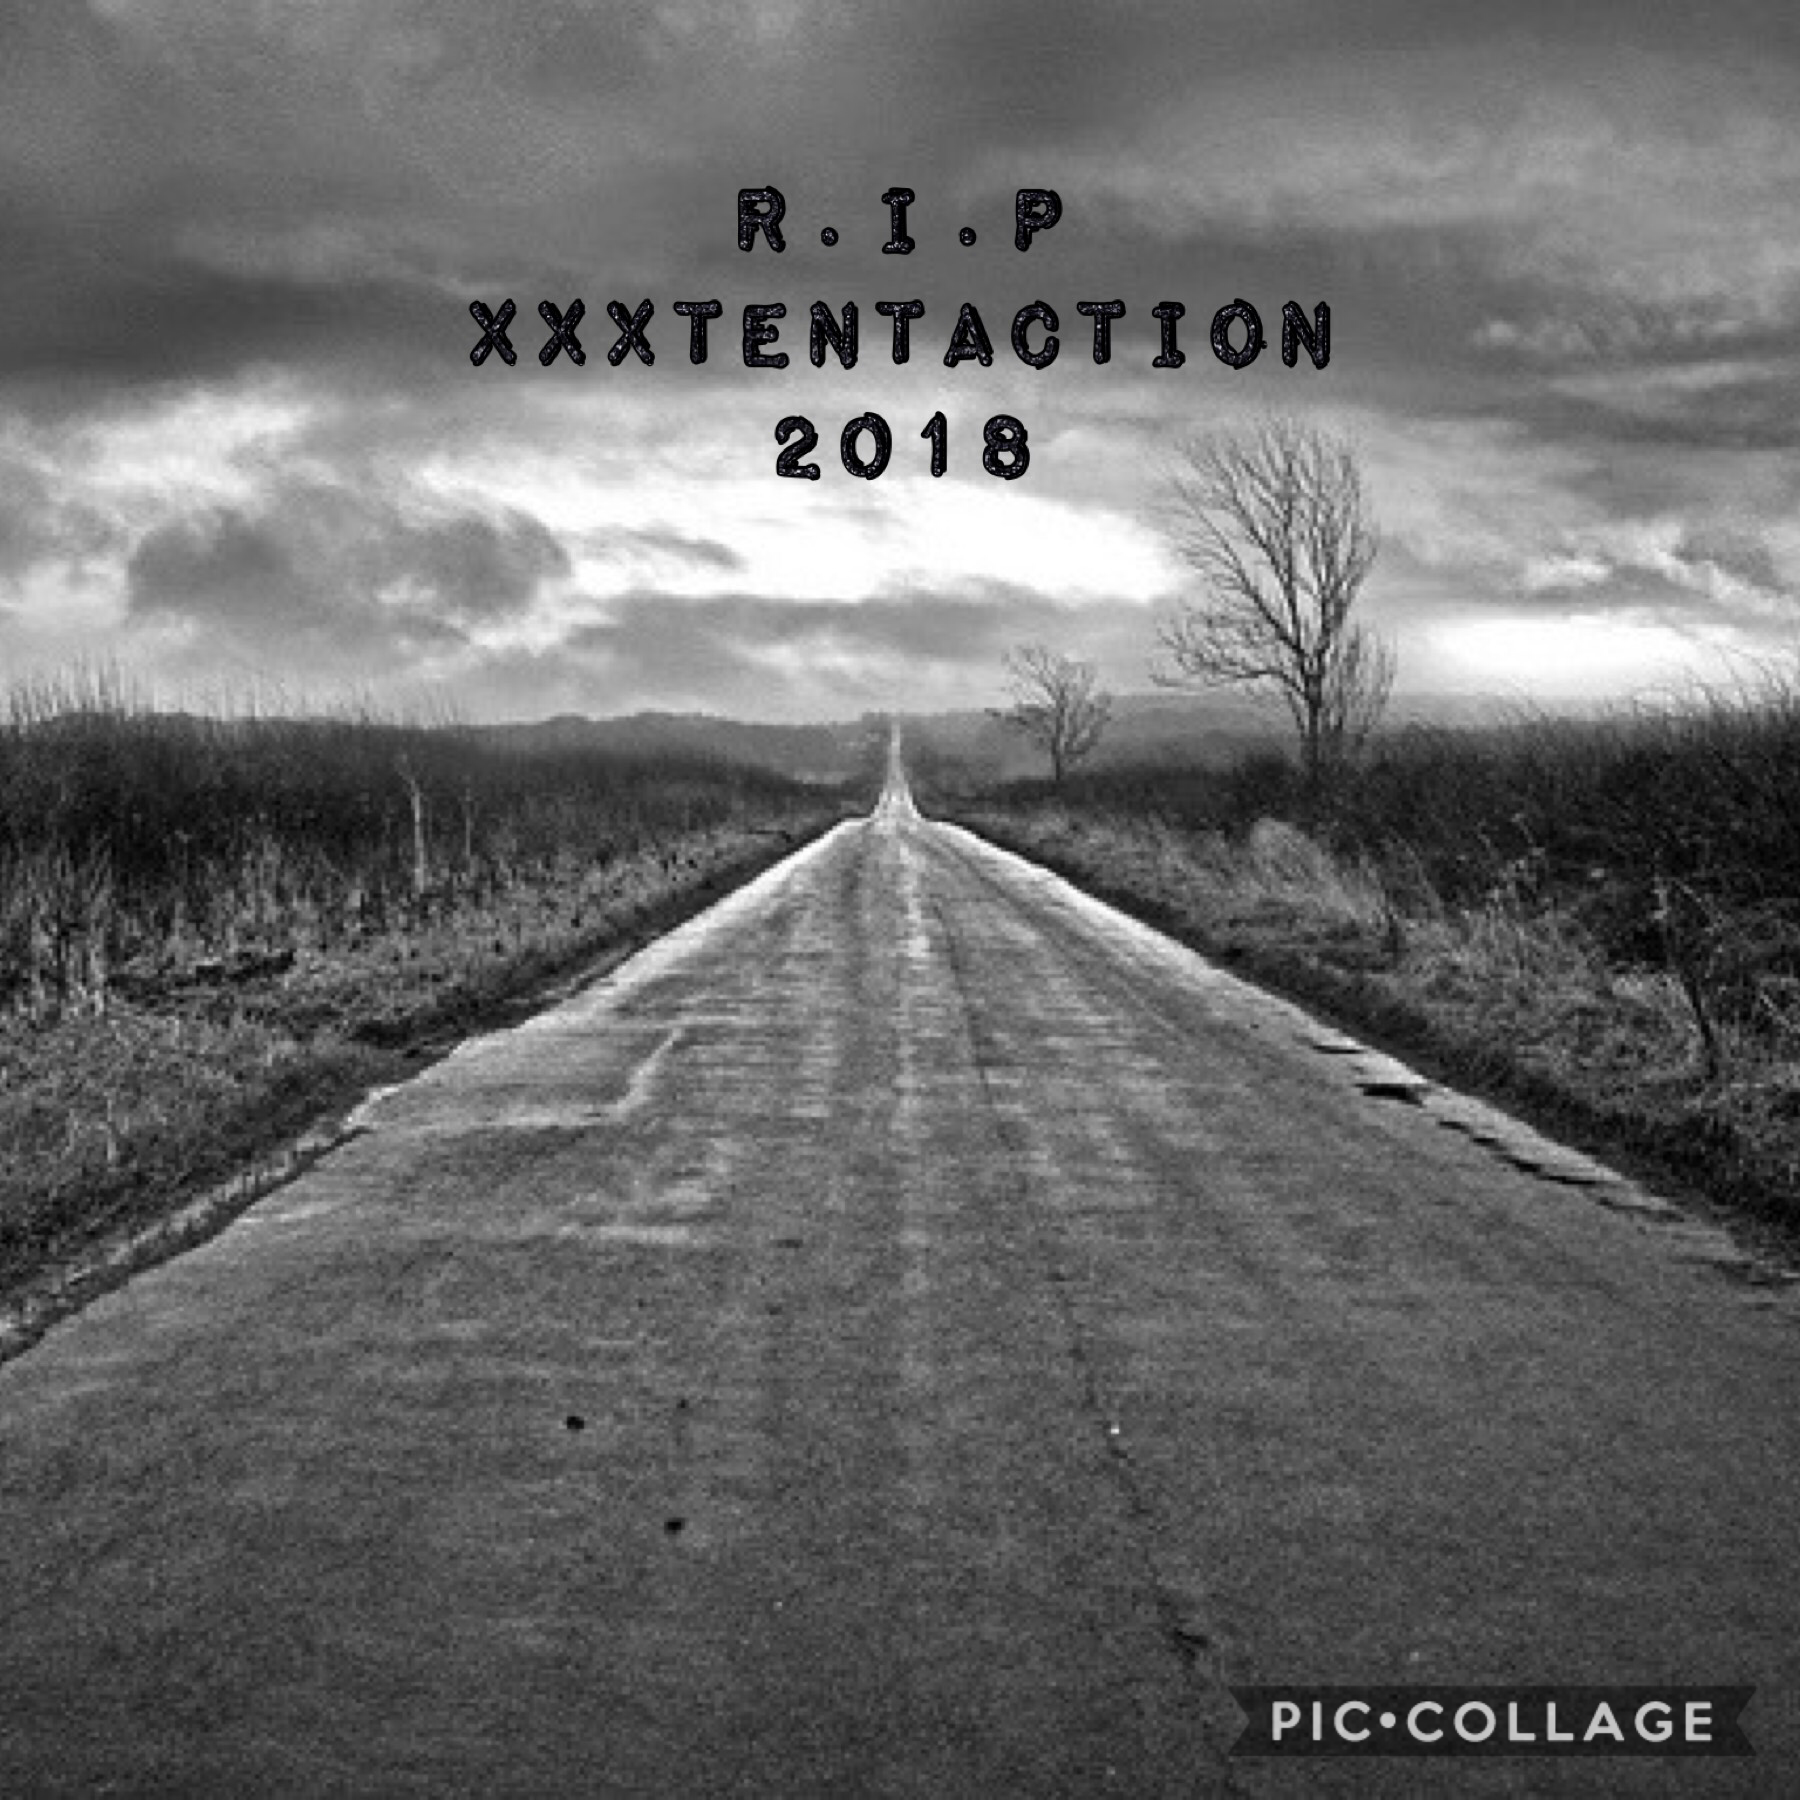 This is for my fav artist XXTENTACTION
R.I.P 2018